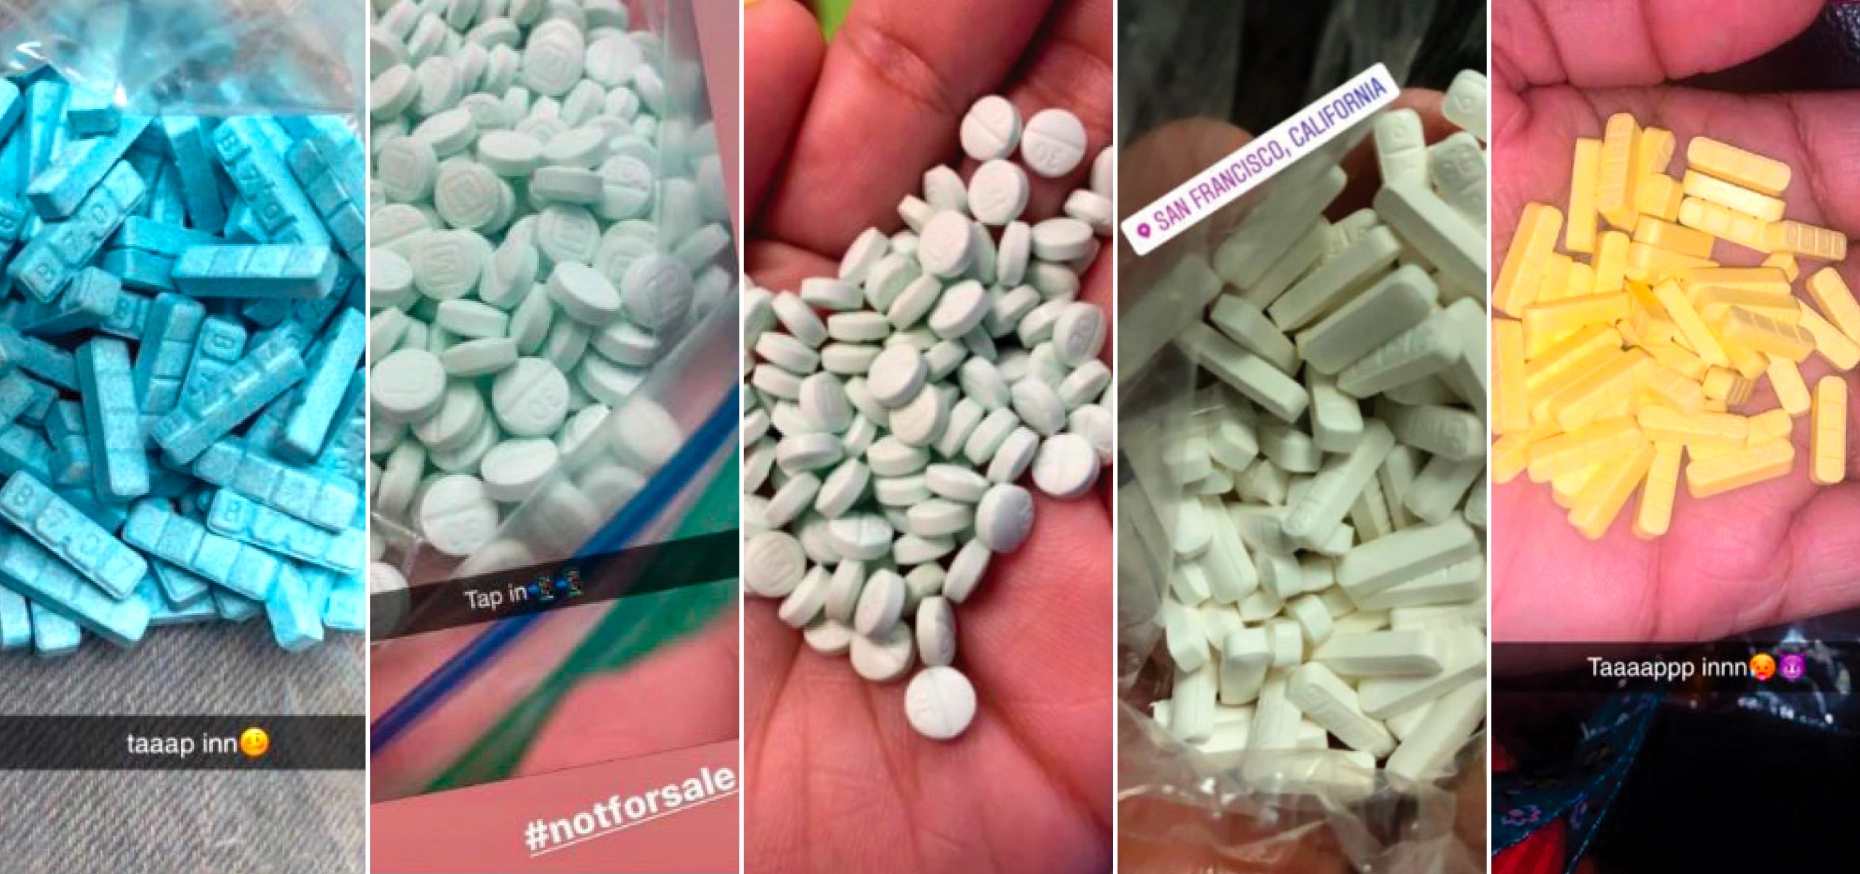 colorful images of pills sold on snapchat